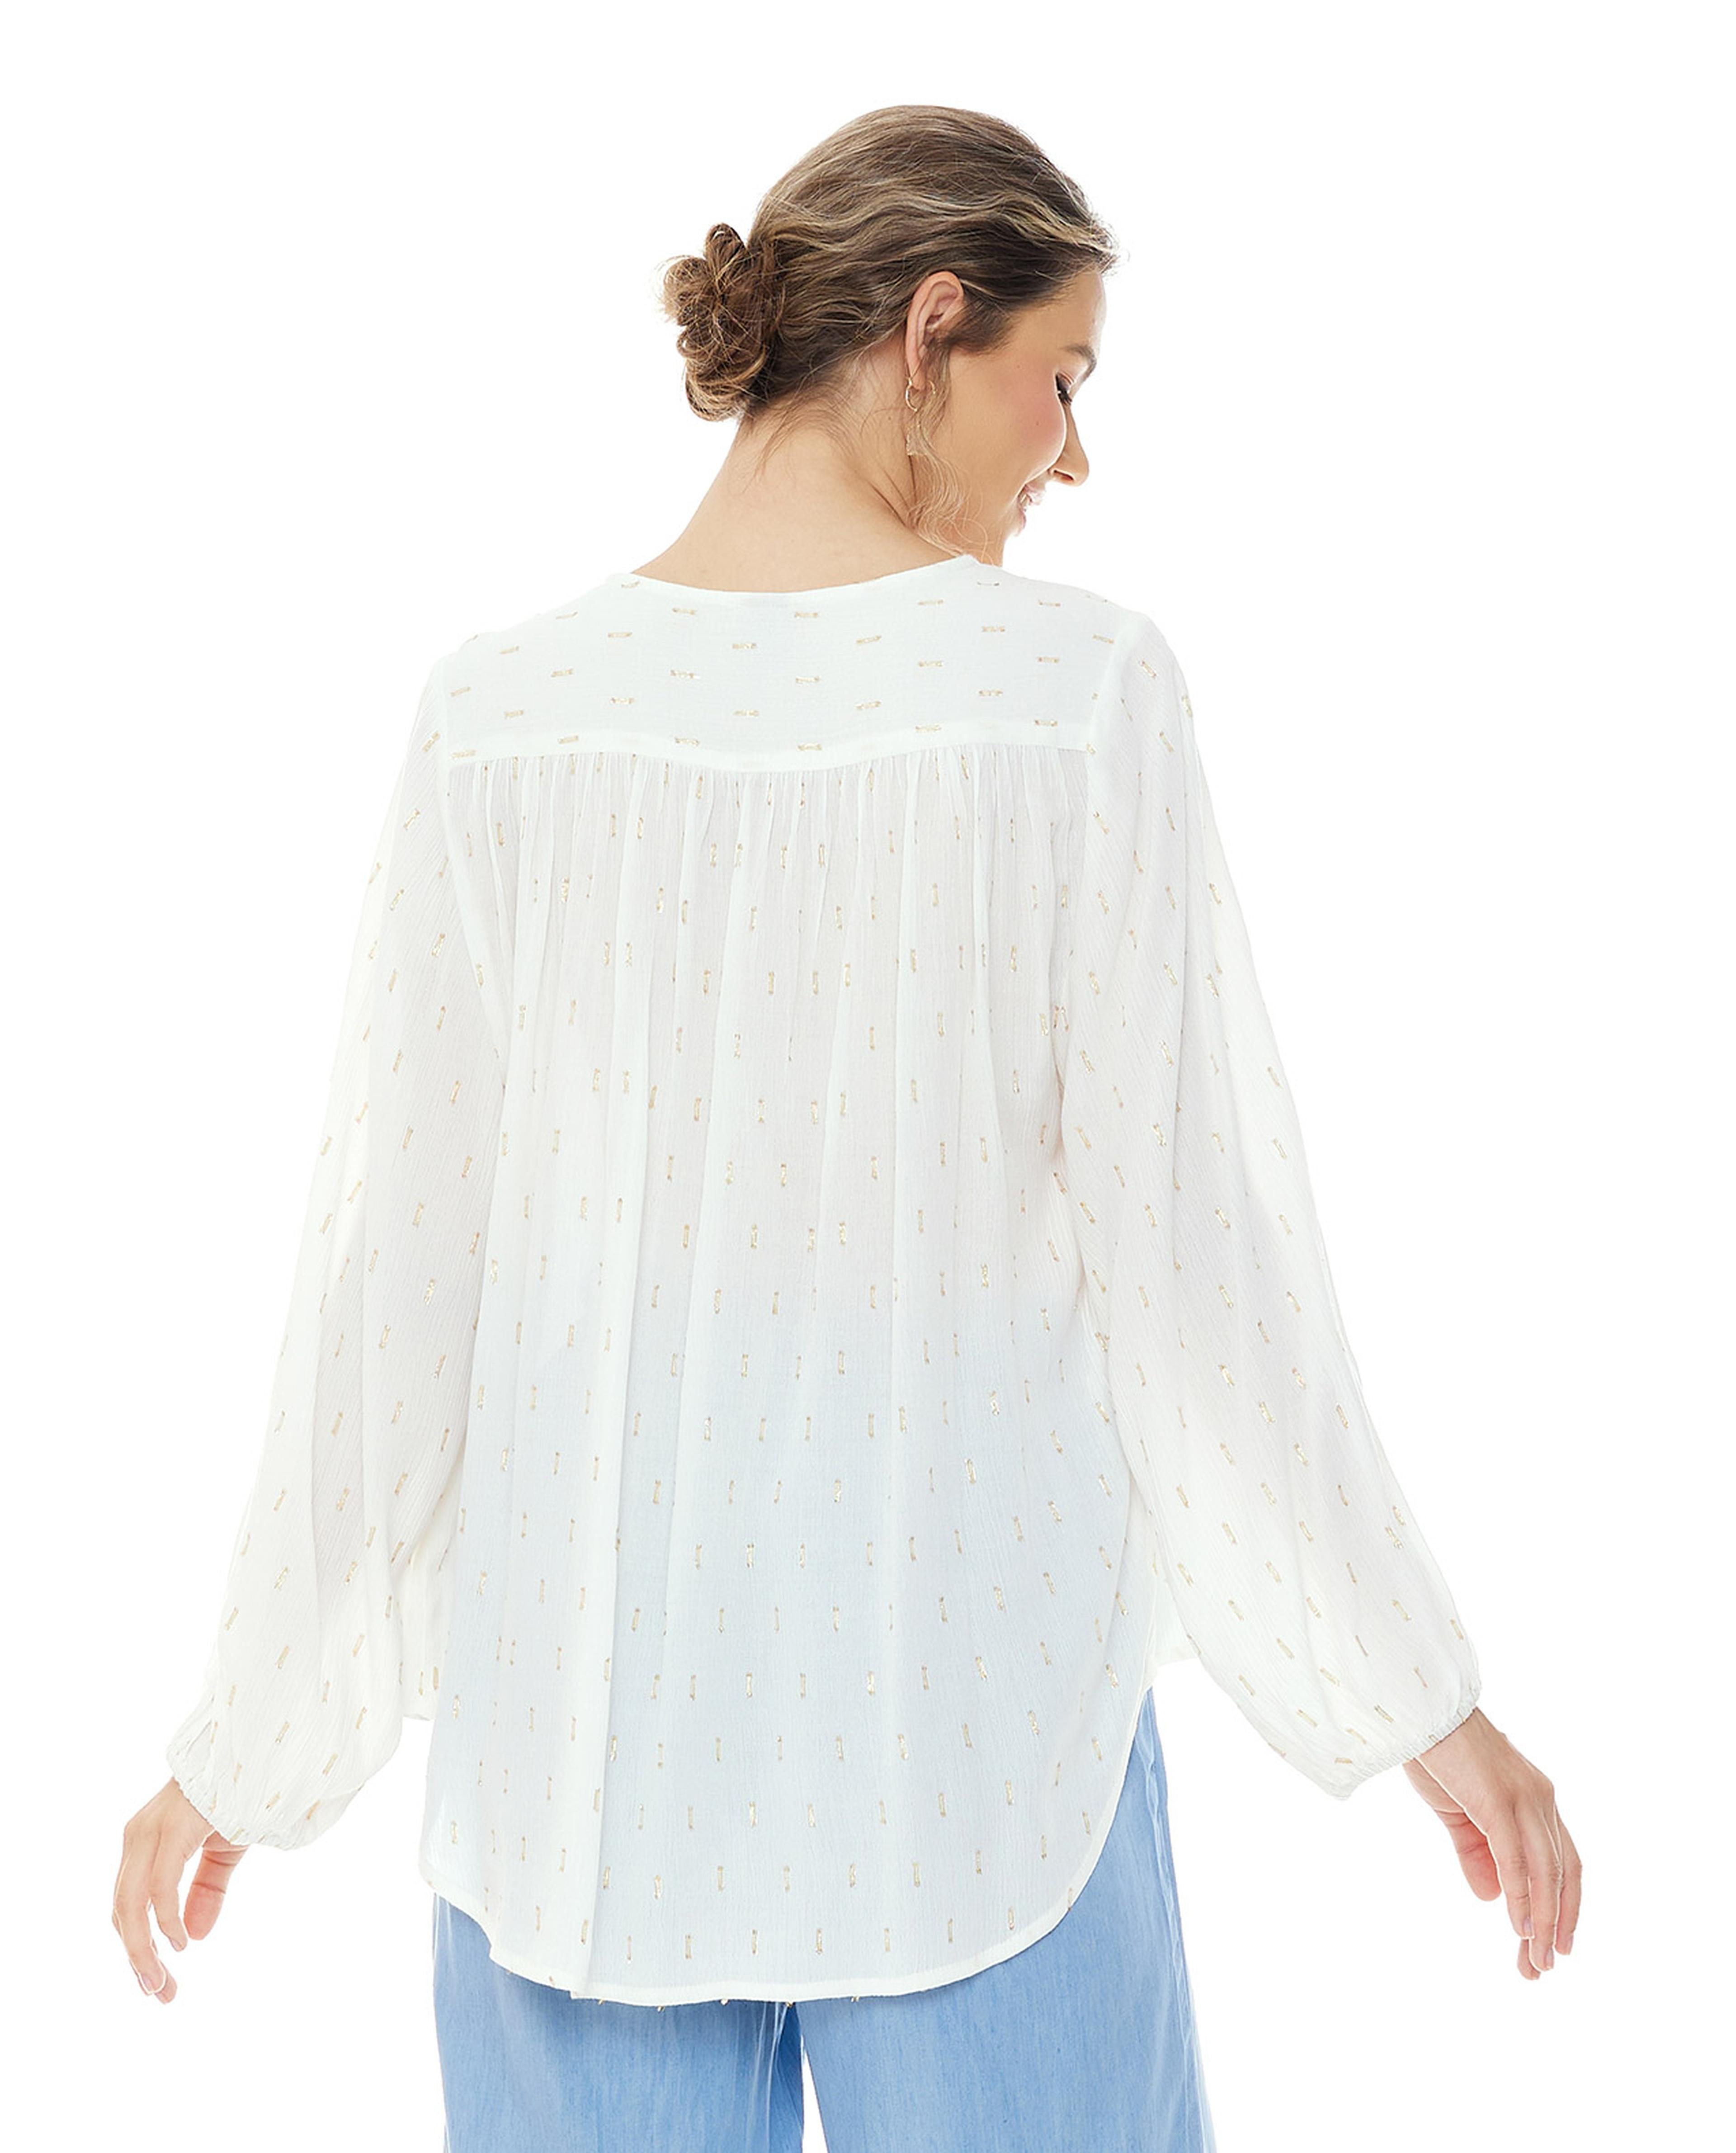 Woven Top with Round Neck and Long Sleeves